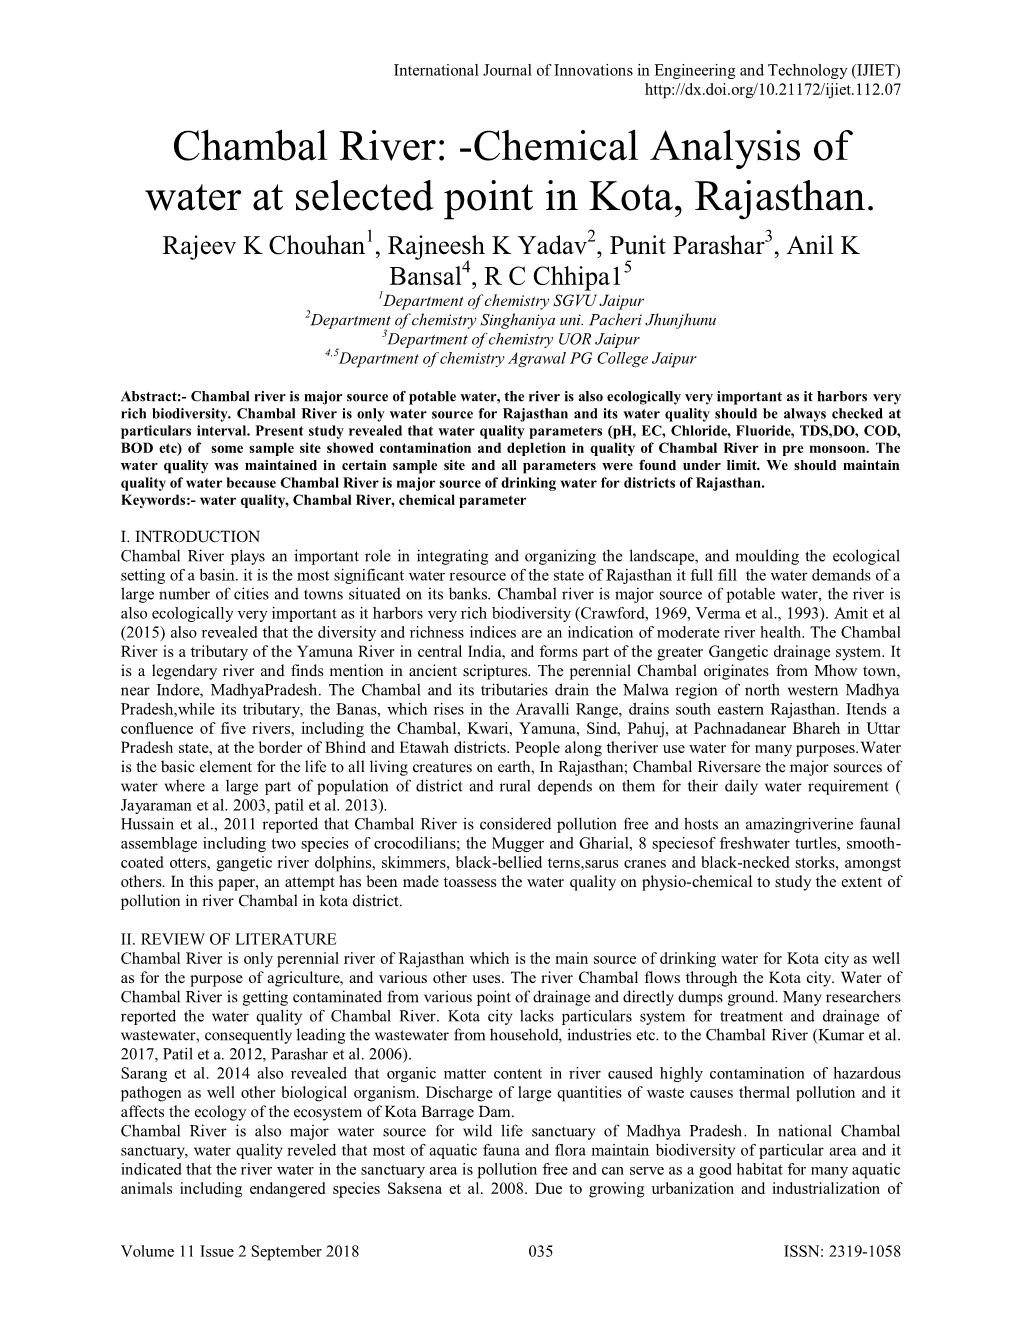 Chambal River: -Chemical Analysis of Water at Selected Point in Kota, Rajasthan